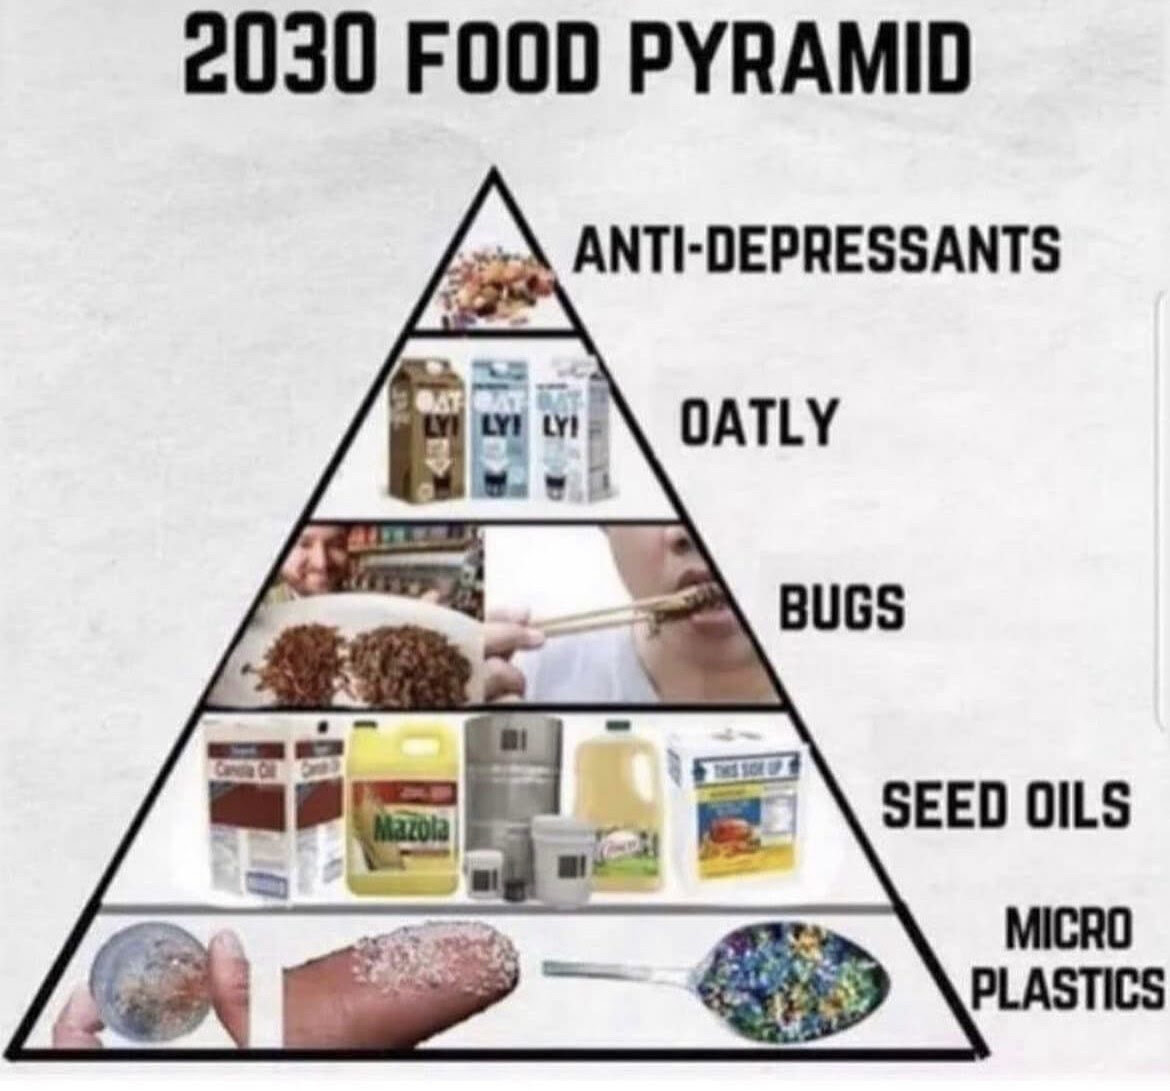 Depiction of the 2030 "Food pyramid" with anti-depressants at the top and micro plastics at the bottom.